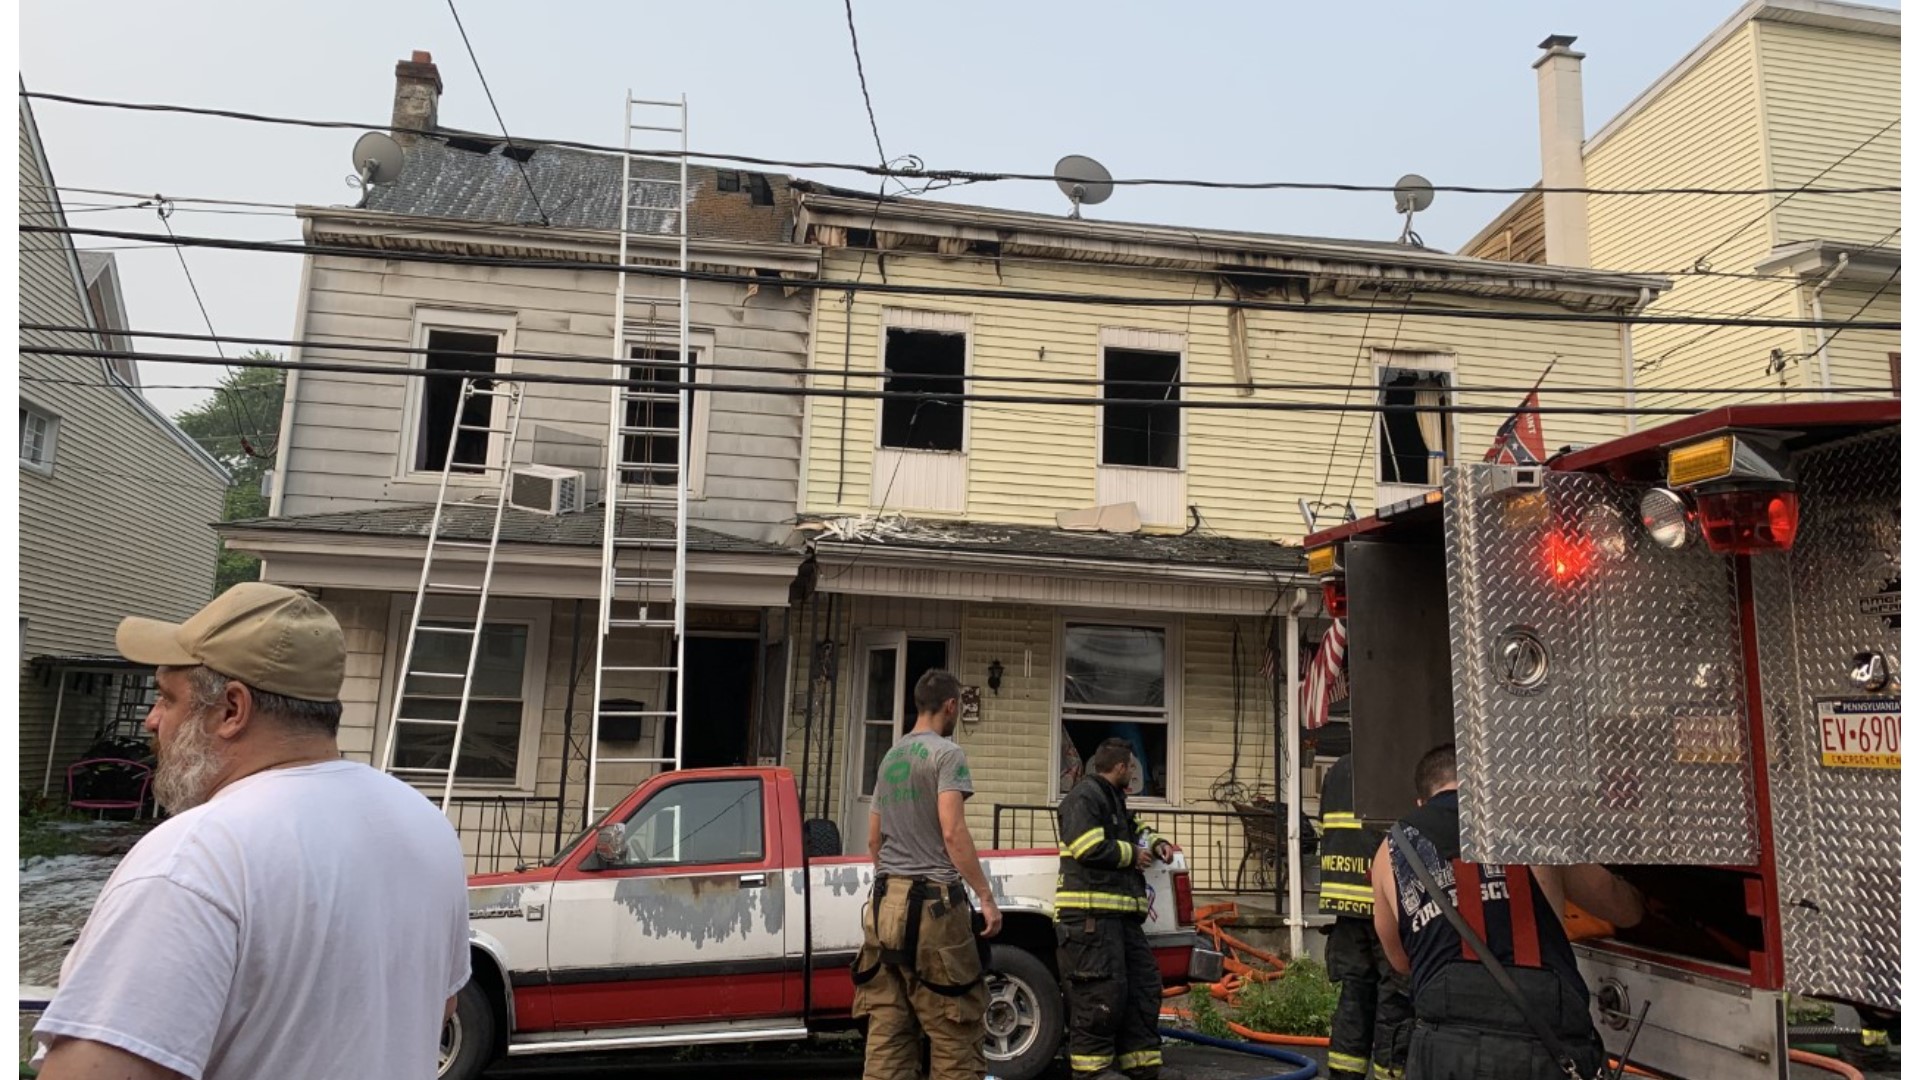 Eight people are looking for new places to live after a fire rips through three rowhomes in Schuylkill County.